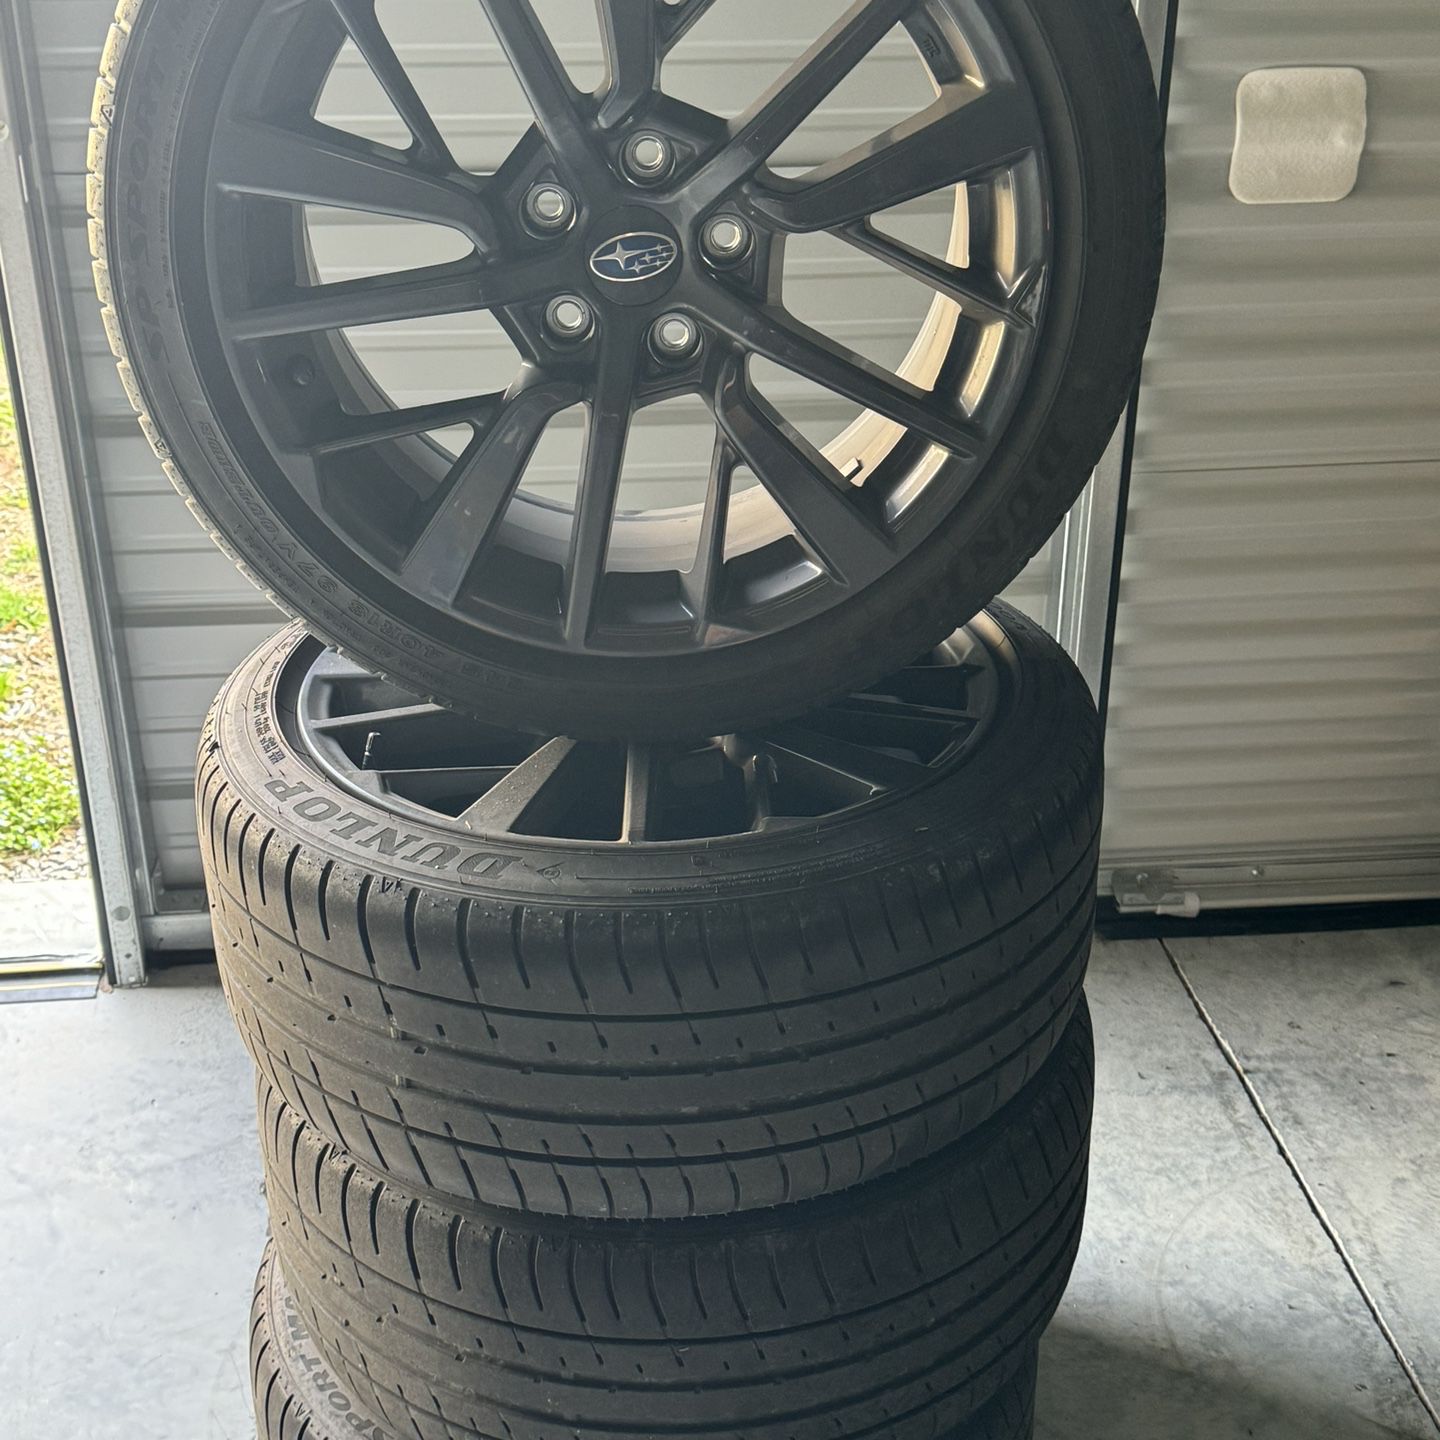 245/40R18 Tires And Rim 